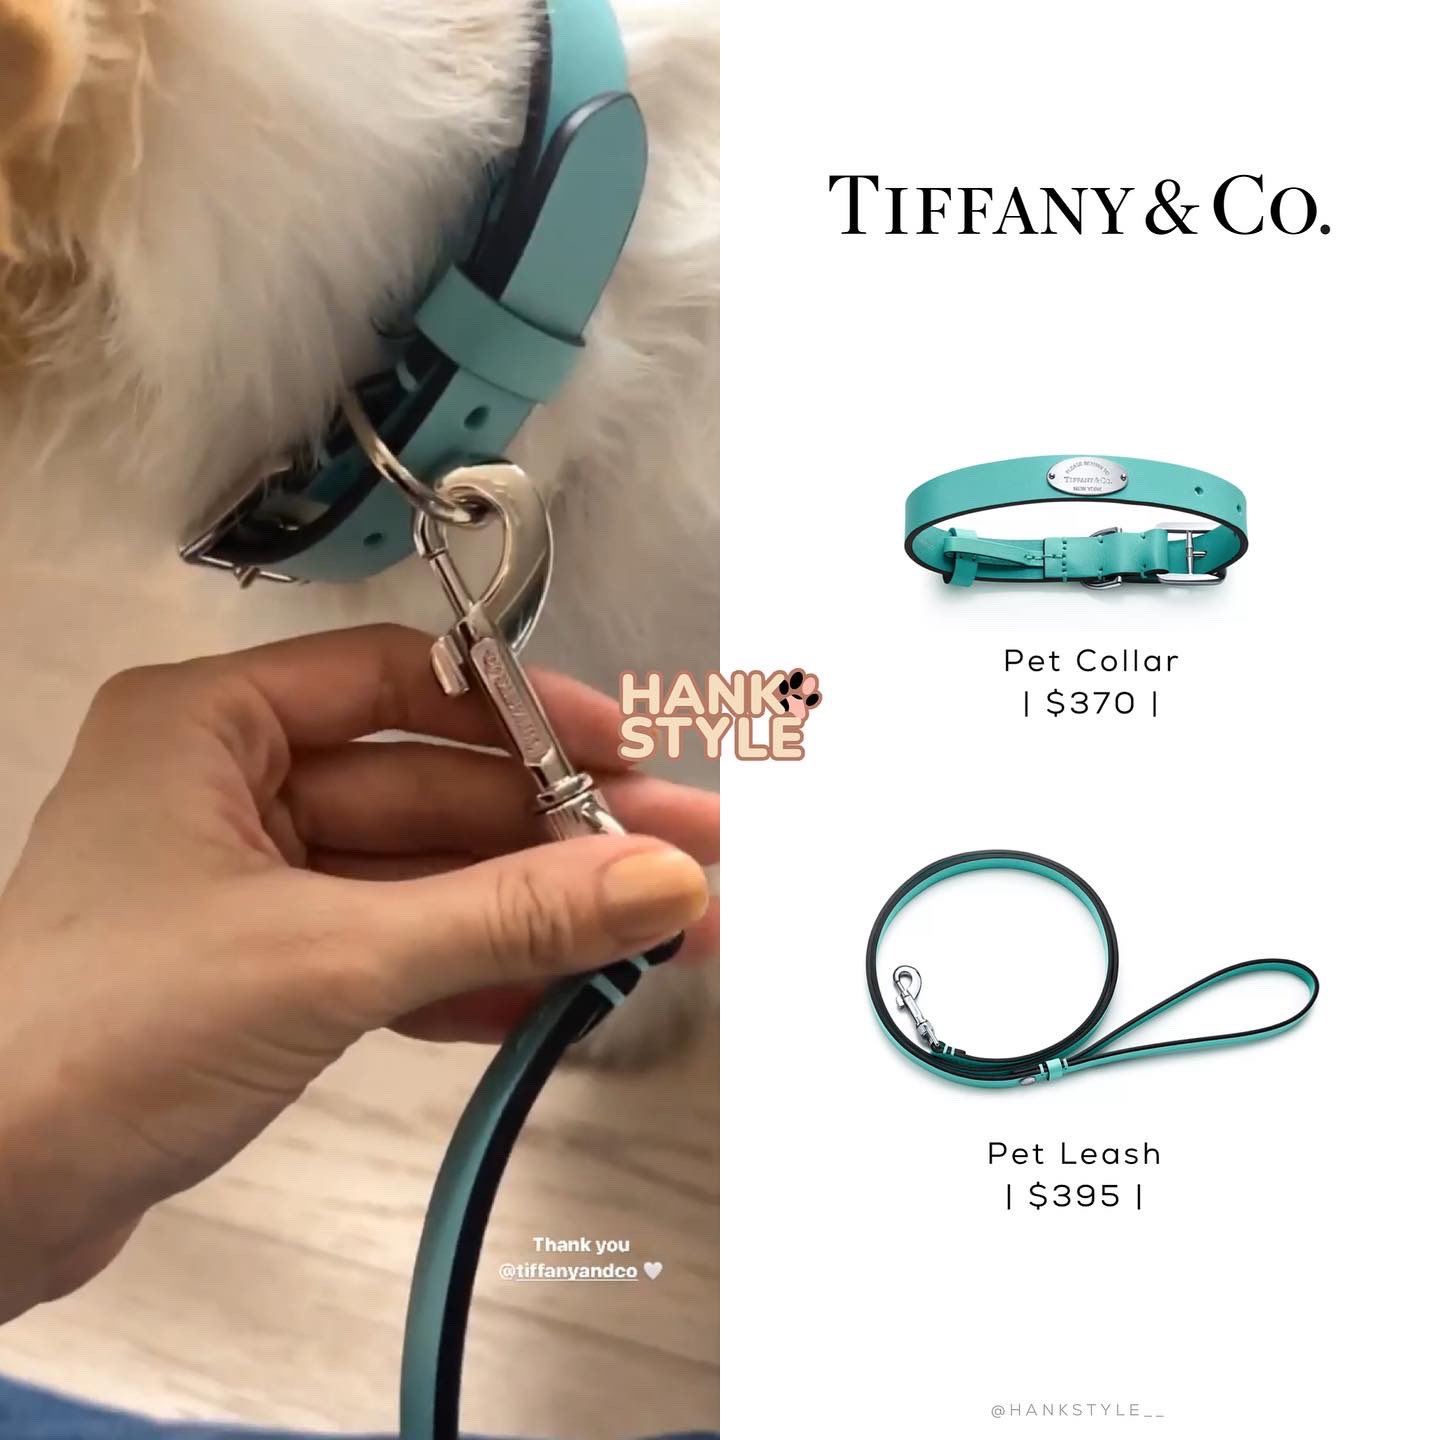 Hank Style 🐶 on X: LISA IG STORY UPDATE (220124) Brand: Tiffany & Co.  Product: Pet Collar in Black Leather Price: $340.00 Brand: Tiffany &  Co. Product: Love Collar Charm Price: $225.00 #